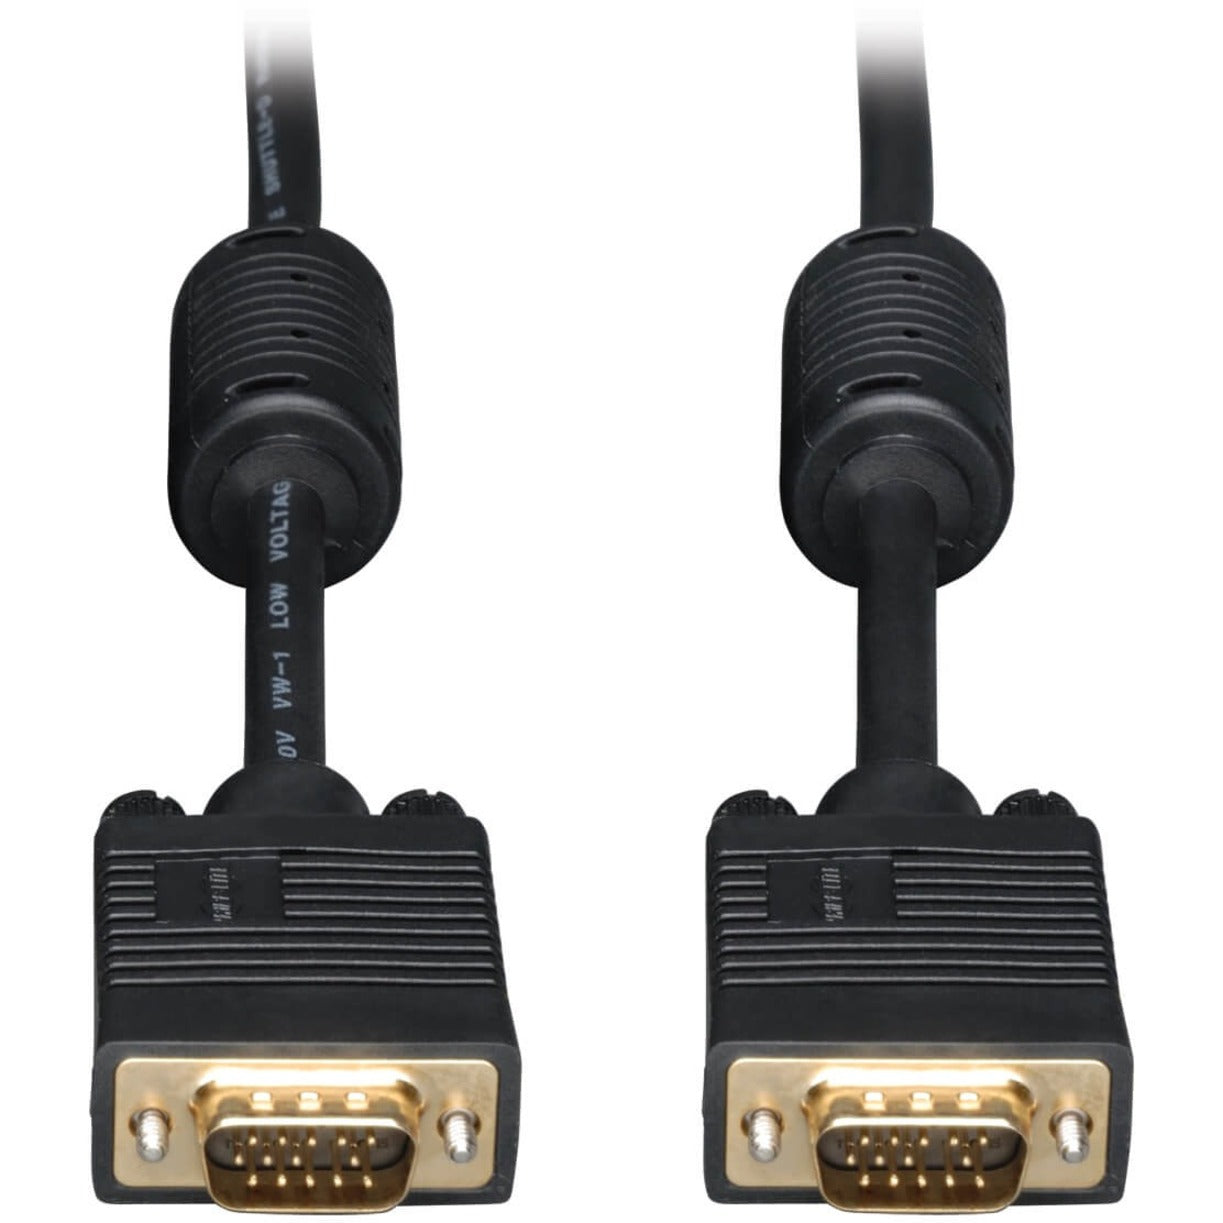 Tripp Lite P502-030 30-ft. SVGA/VGA Monitor Cable with RGB Coax, Molded, Copper Conductor, Gold Plated Connectors